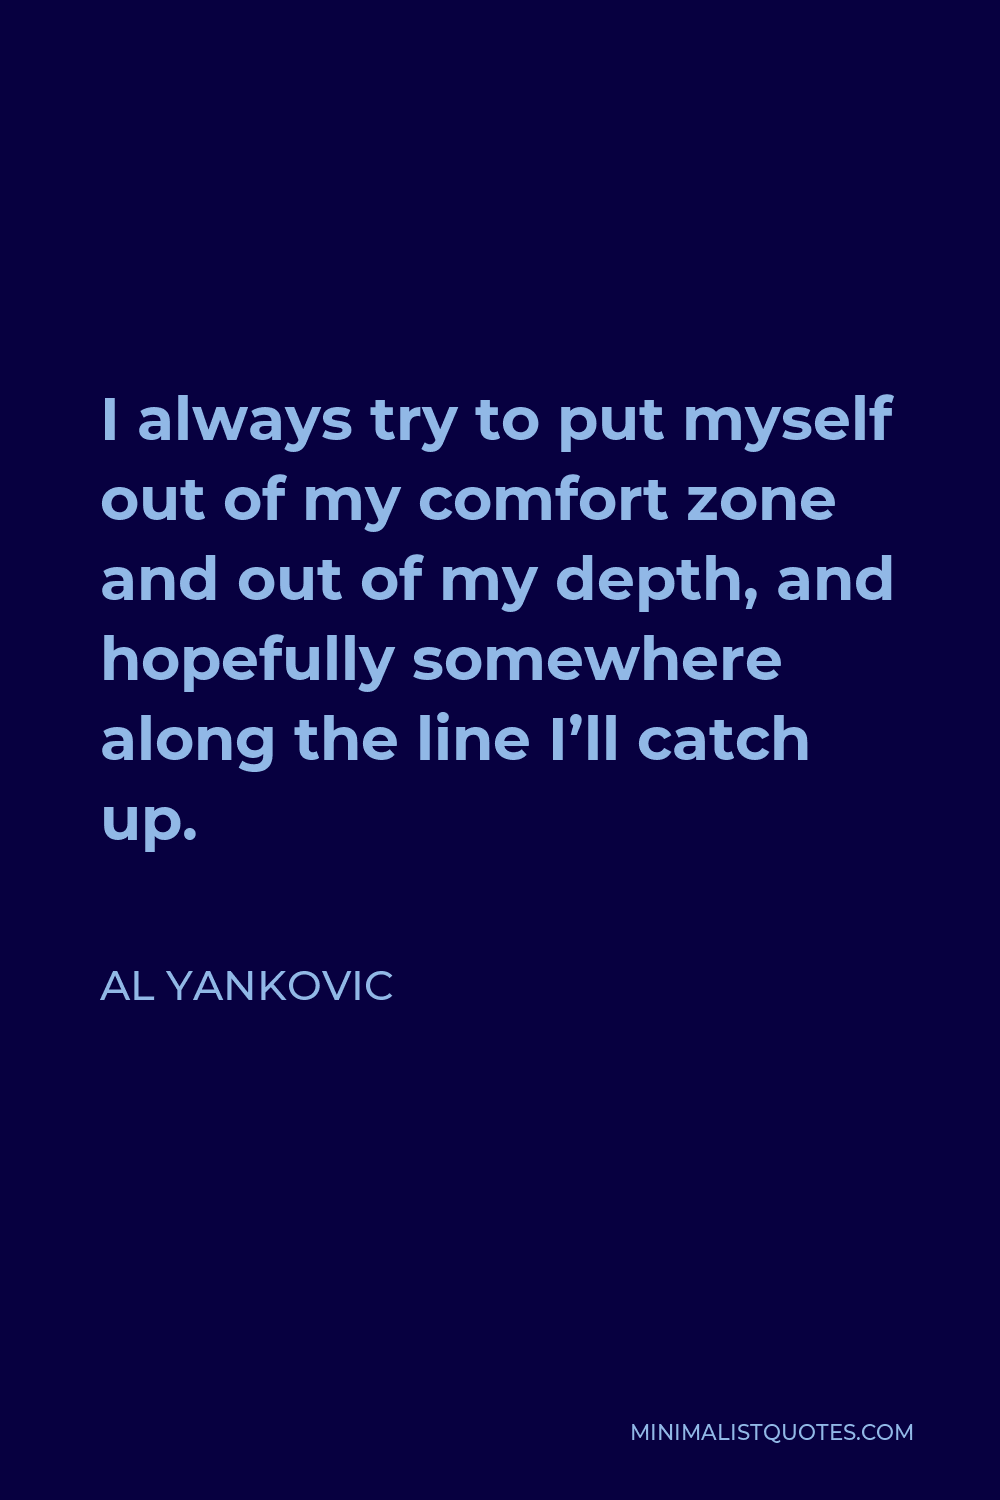 Al Yankovic Quote: I always try to put myself out of my comfort zone and out  of my depth, and hopefully somewhere along the line I'll catch up.